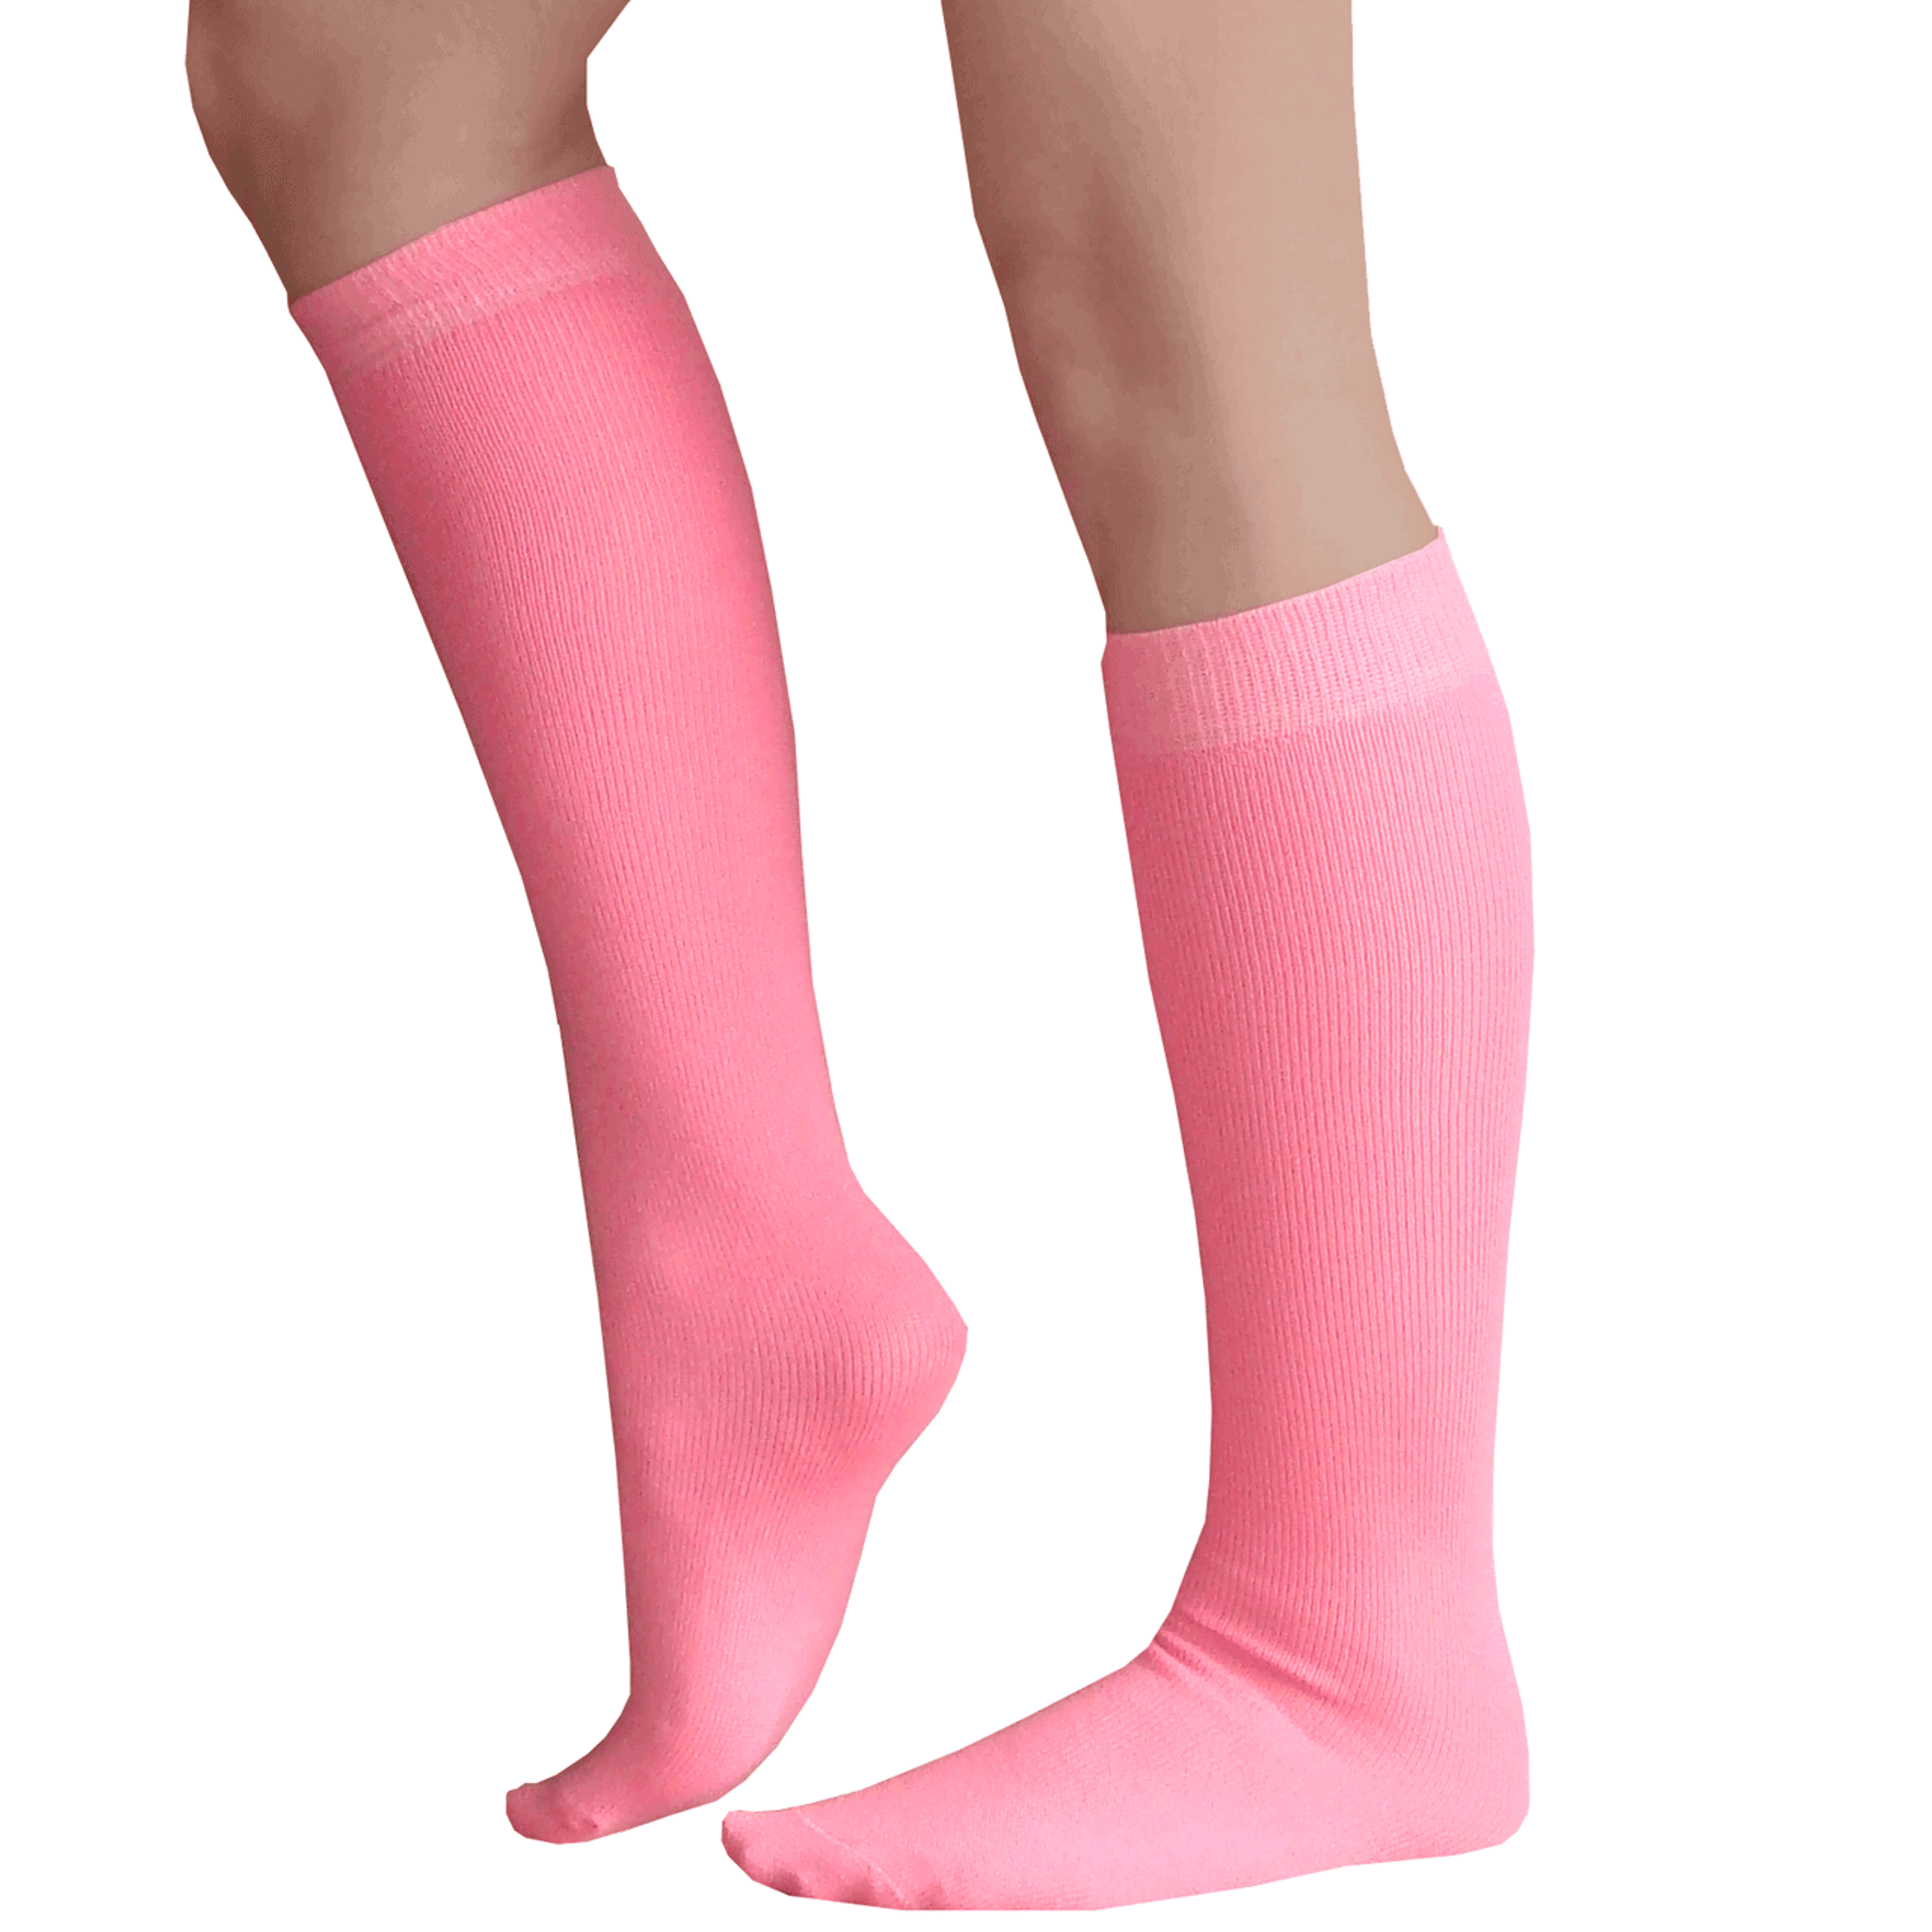 Thin Solid Pink Knee Highs